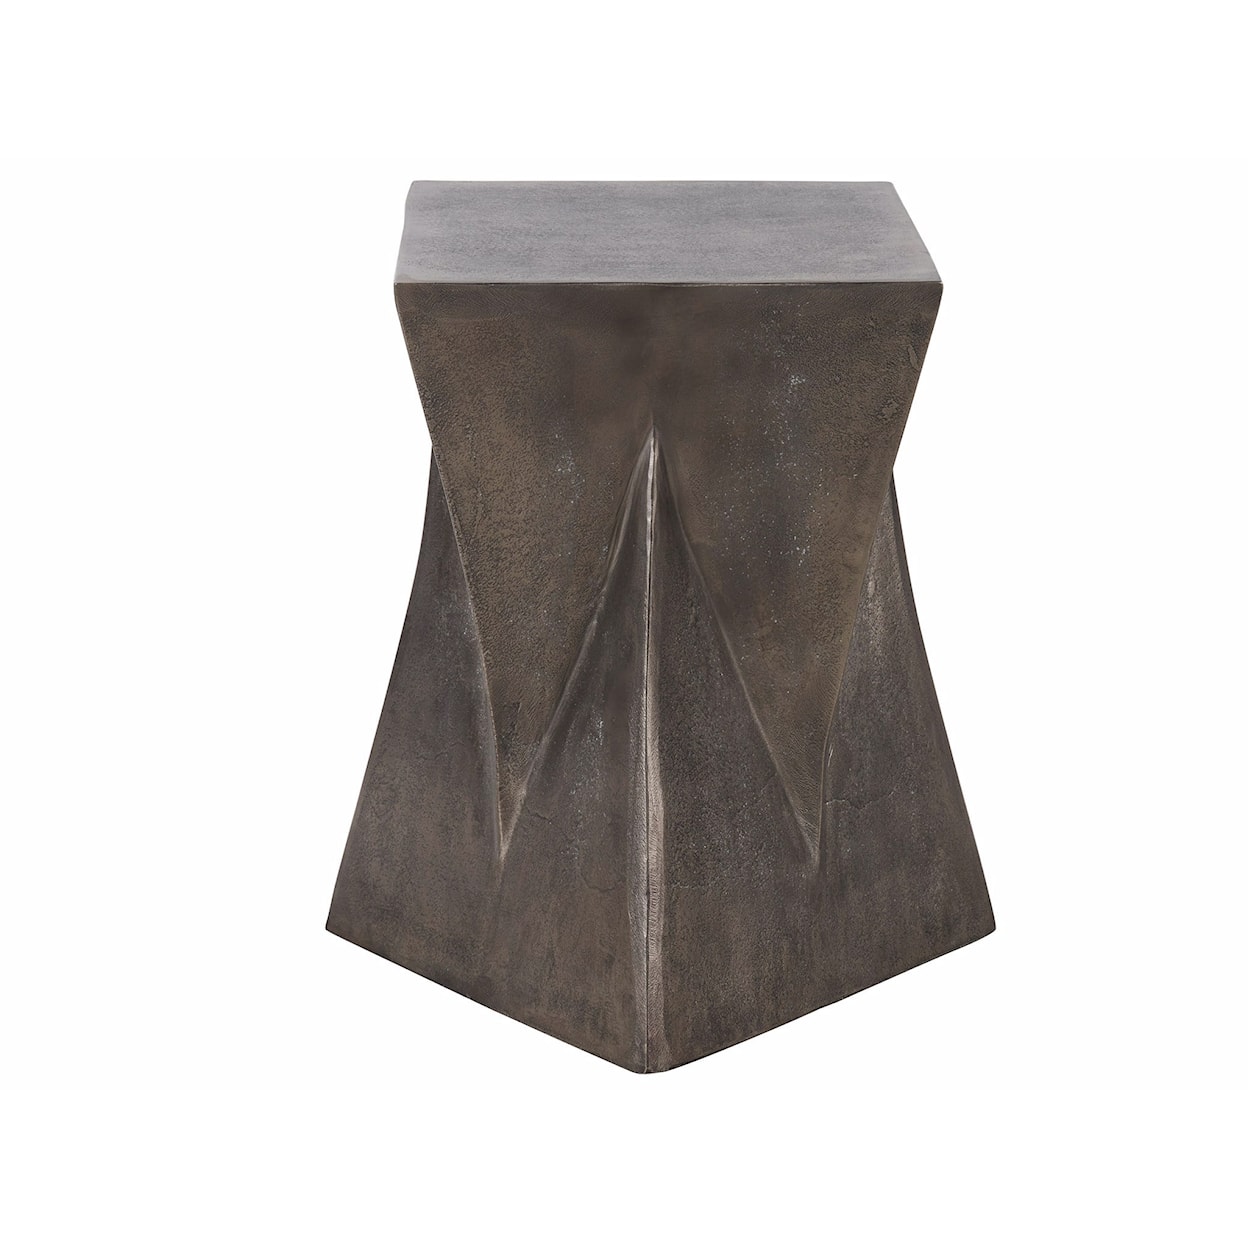 Universal New Modern Side Table